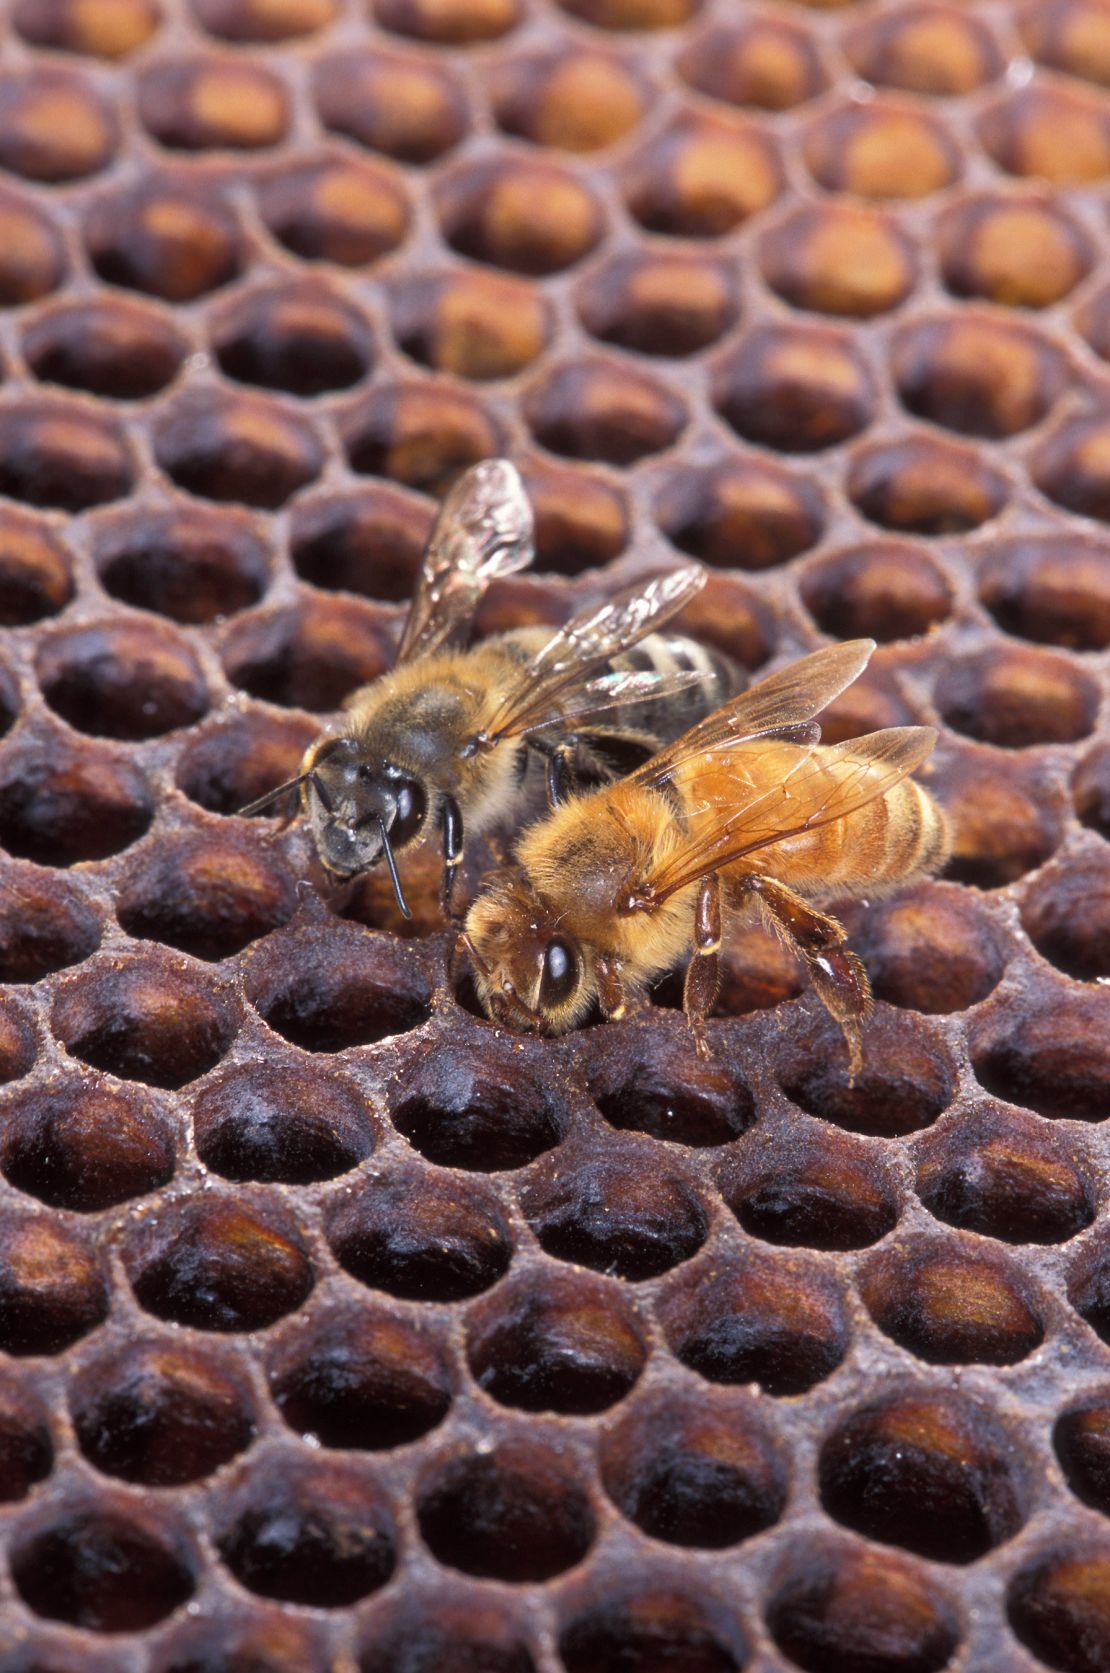 An Africanized honeybee (left) and a European honeybee on honeycomb. Despite color differences between these two bees, normally they can't be identified by eye.
Photo by Scott Bauer.
